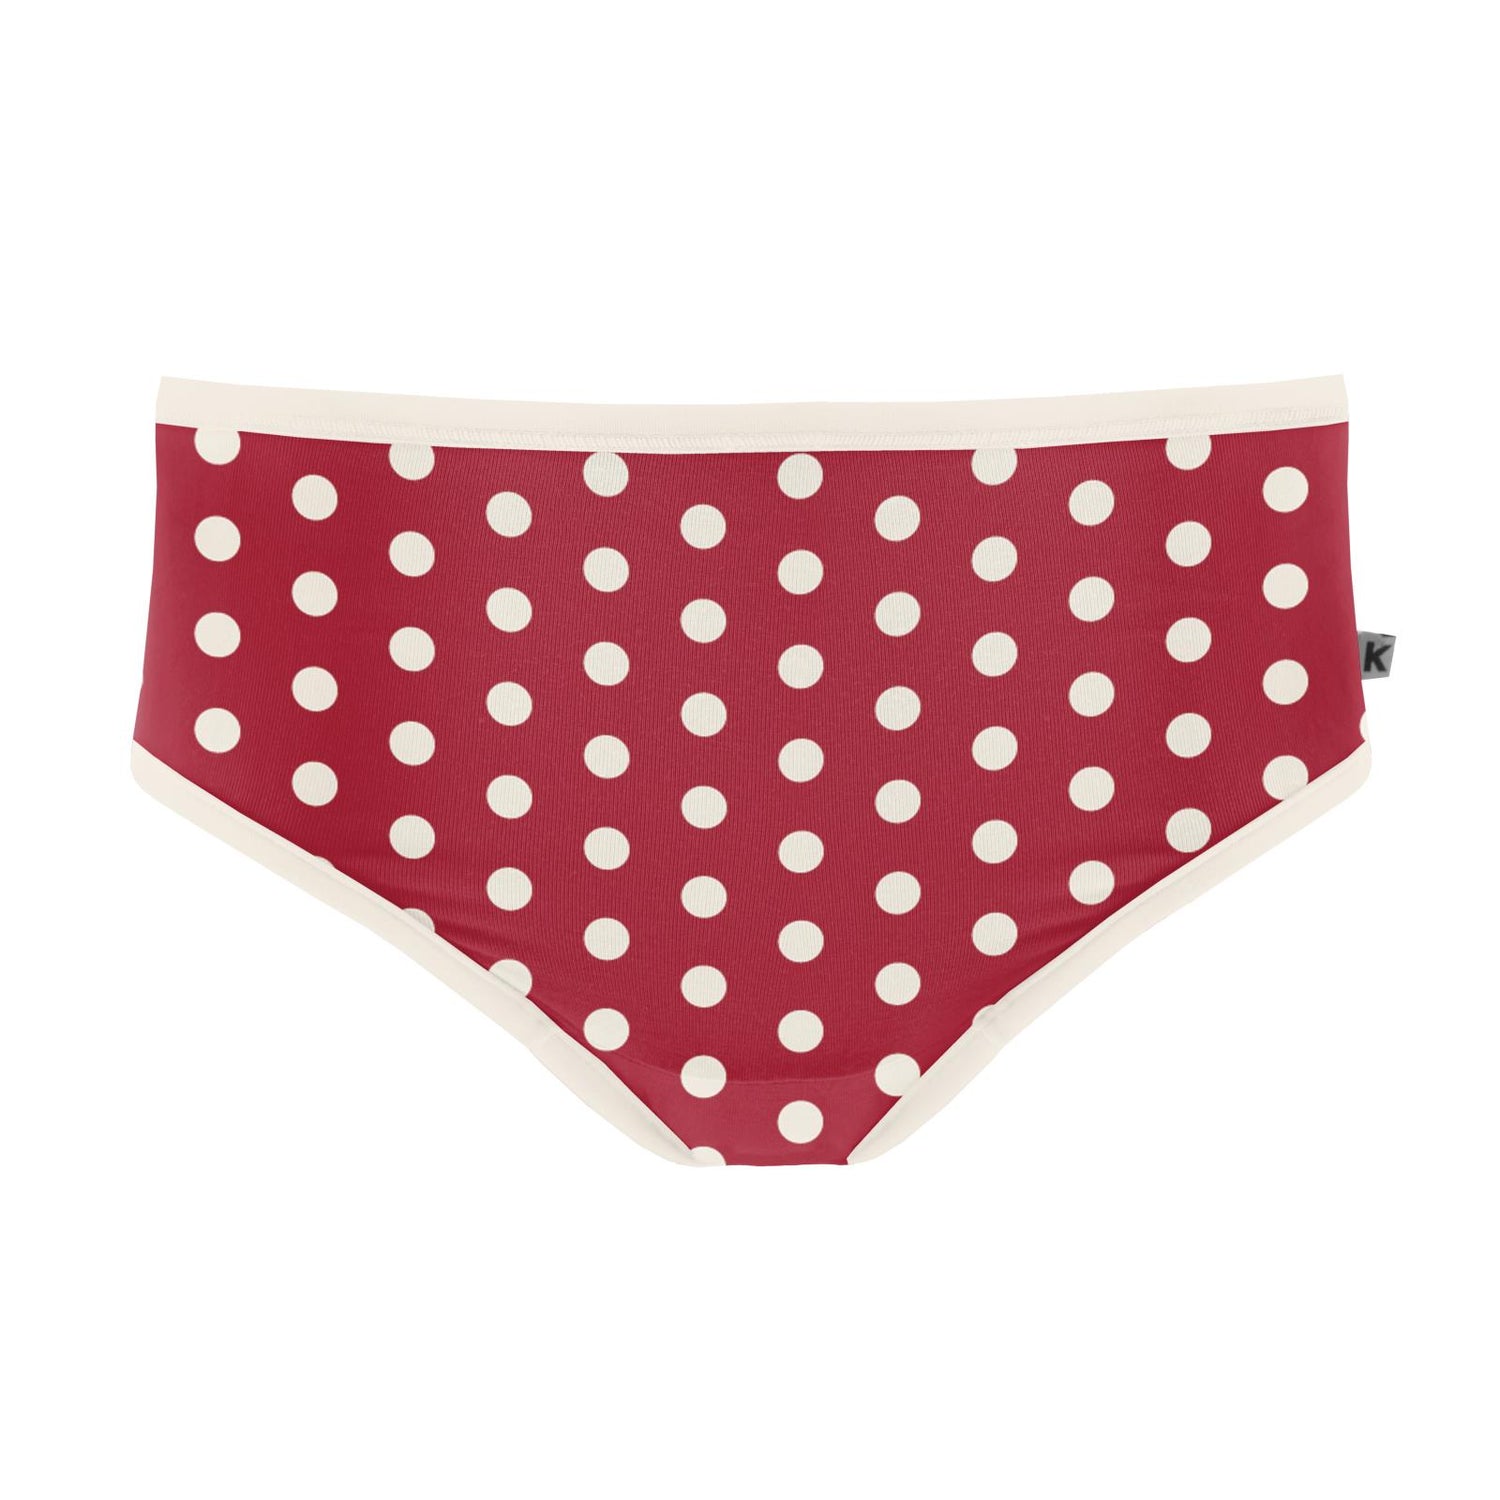 Women's Print Classic Brief in Candy Apple Polka Dots